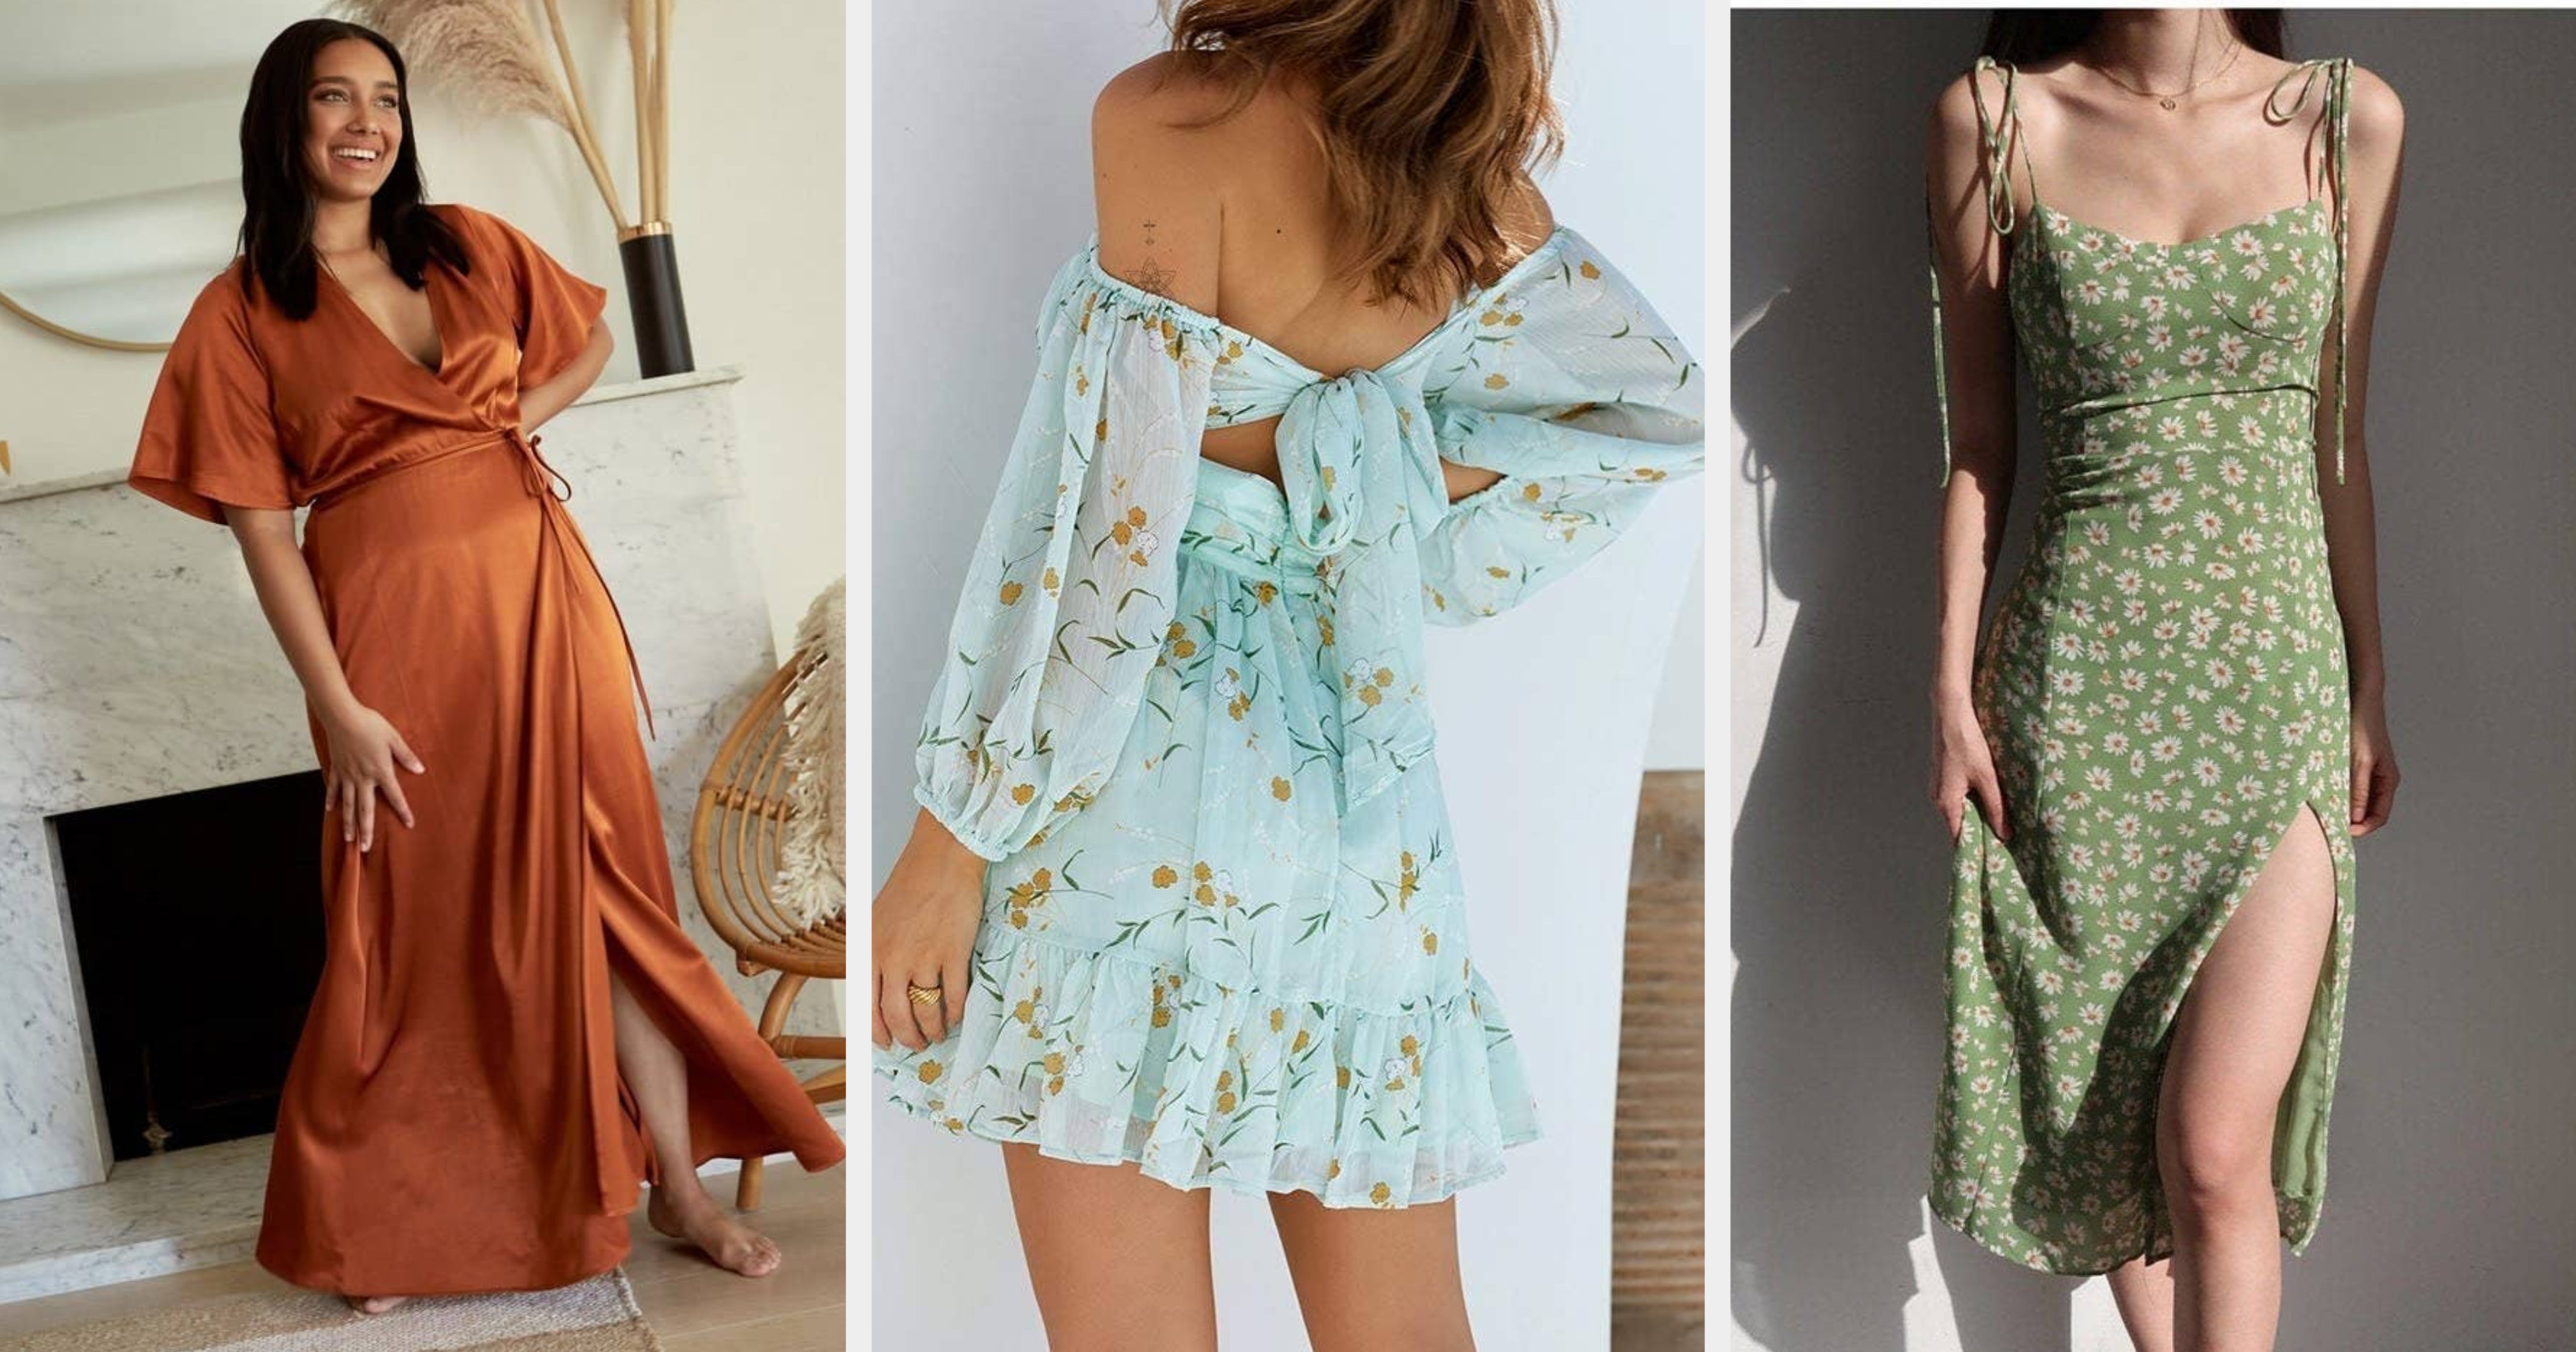 If You Want To Get Some Compliments, Check Out These 32 Summer Dresses